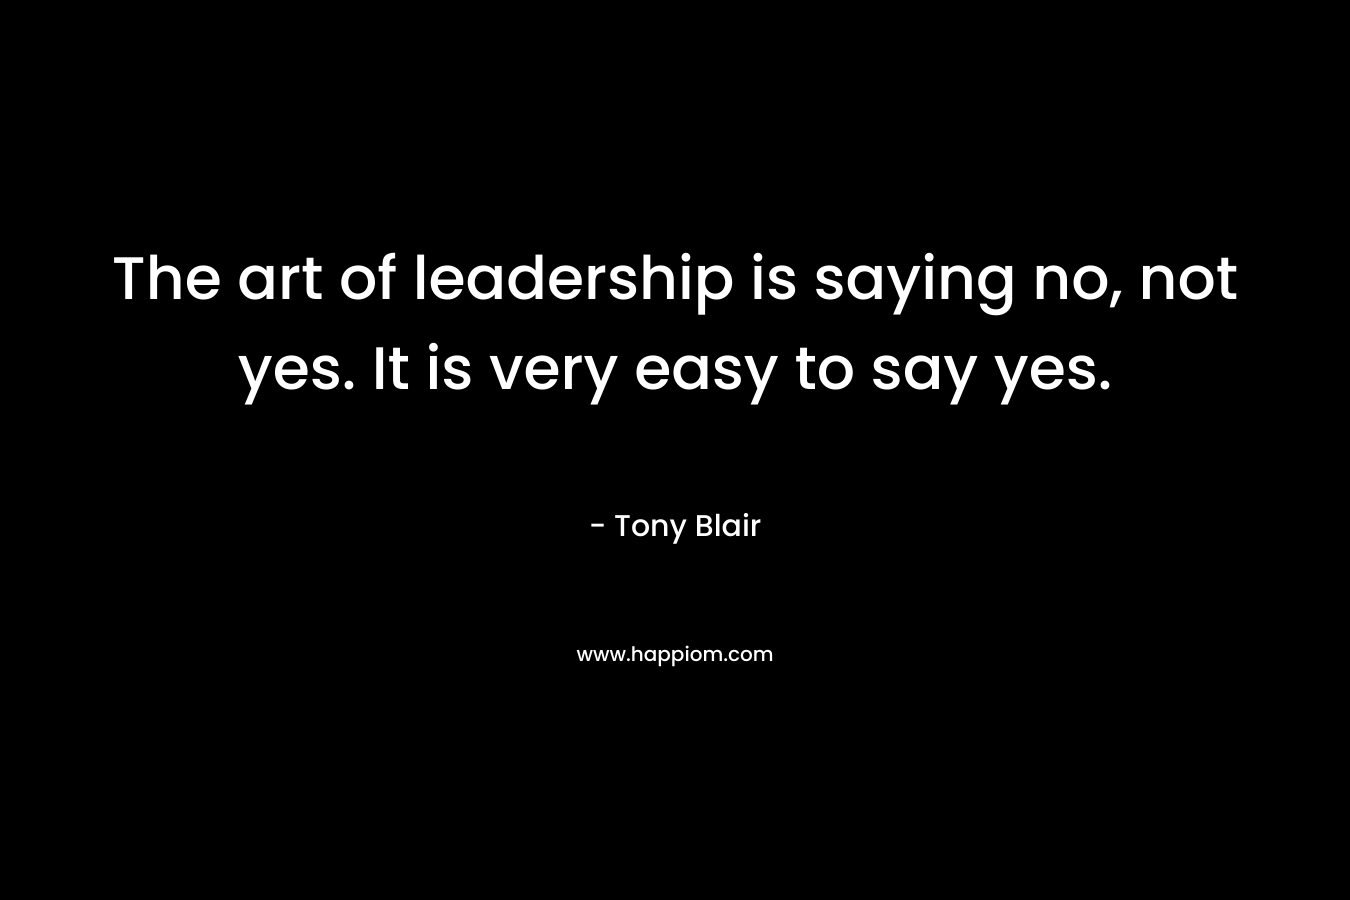 The art of leadership is saying no, not yes. It is very easy to say yes. – Tony Blair